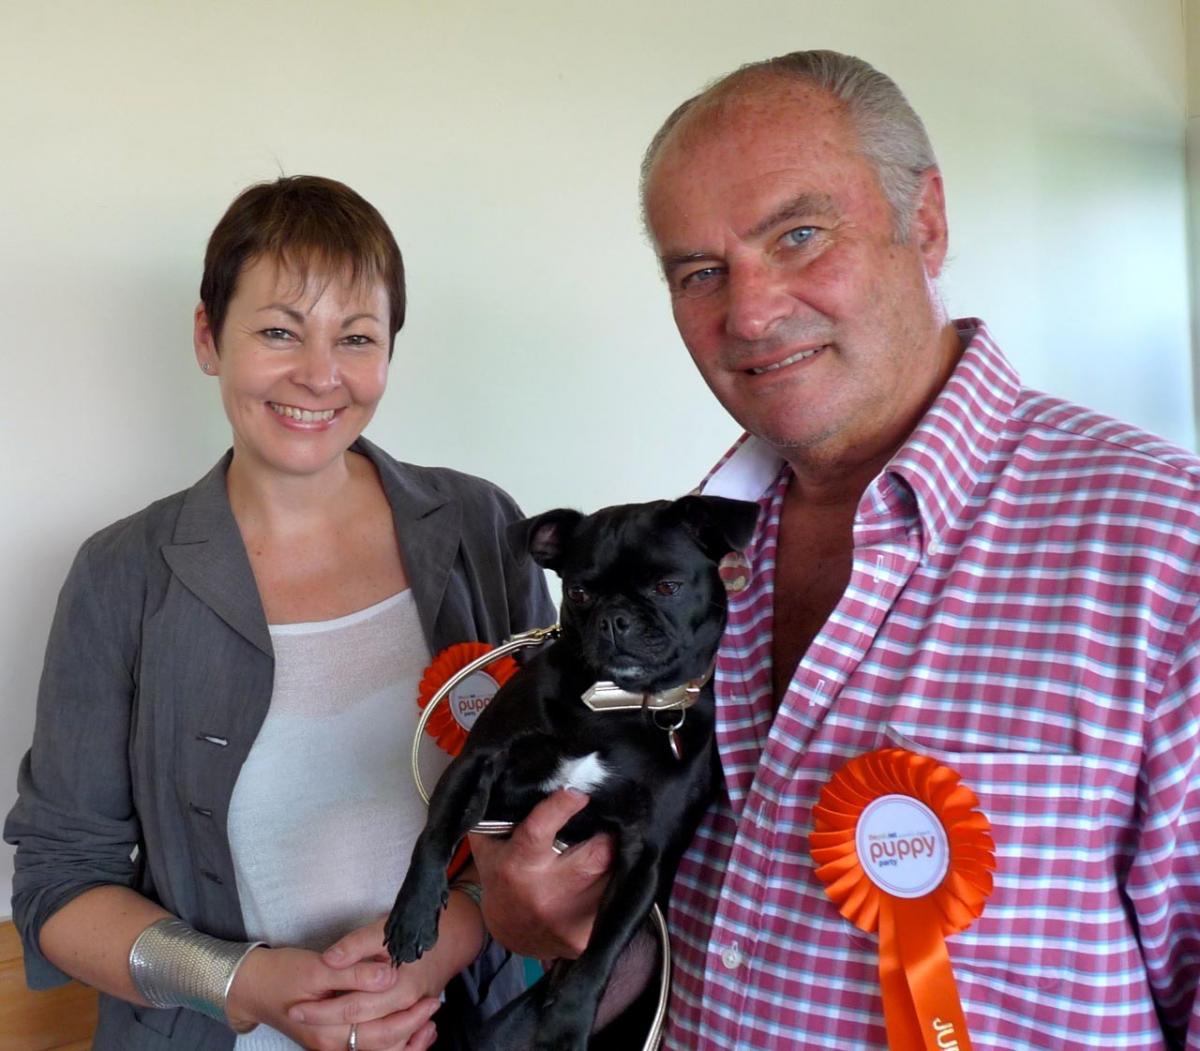 Caroline Lucas "This was a great event! A lot of fun, but at the same time drawing urgent attention to the terrible cruelty of puppy-farming. It's a scandal that in the 21st century, this kind of 'factory farming' for puppies still continues."